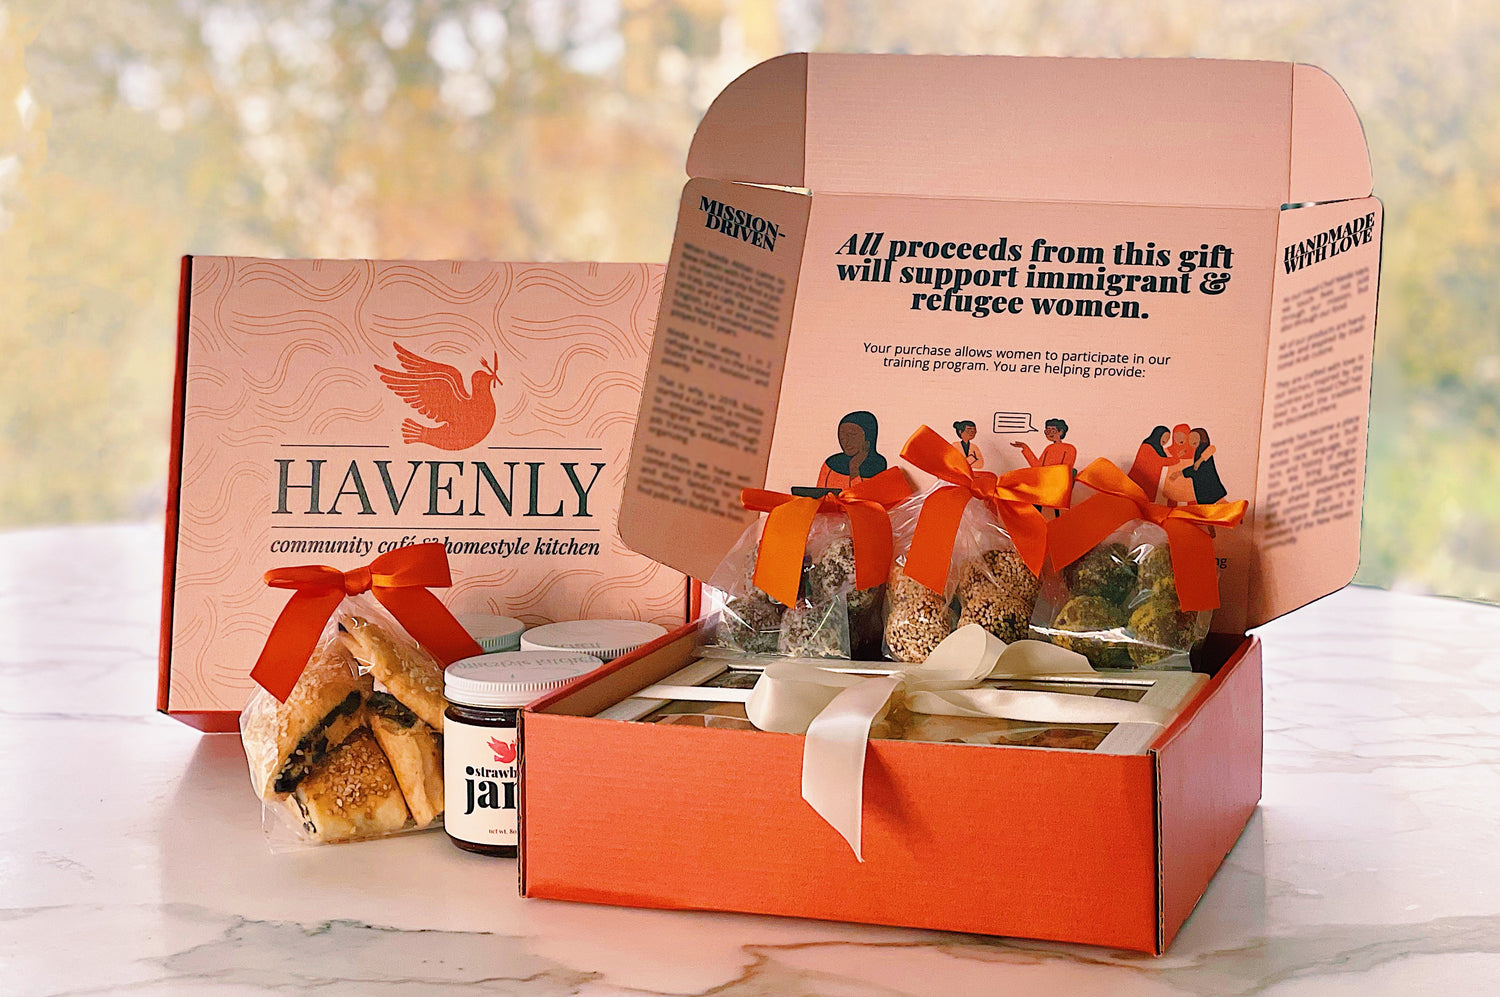 The Havenly Gift Box, which features jam, cookies, and other products made in New Haven at Havenly. All proceeds support immigrant and refugee women in our community.